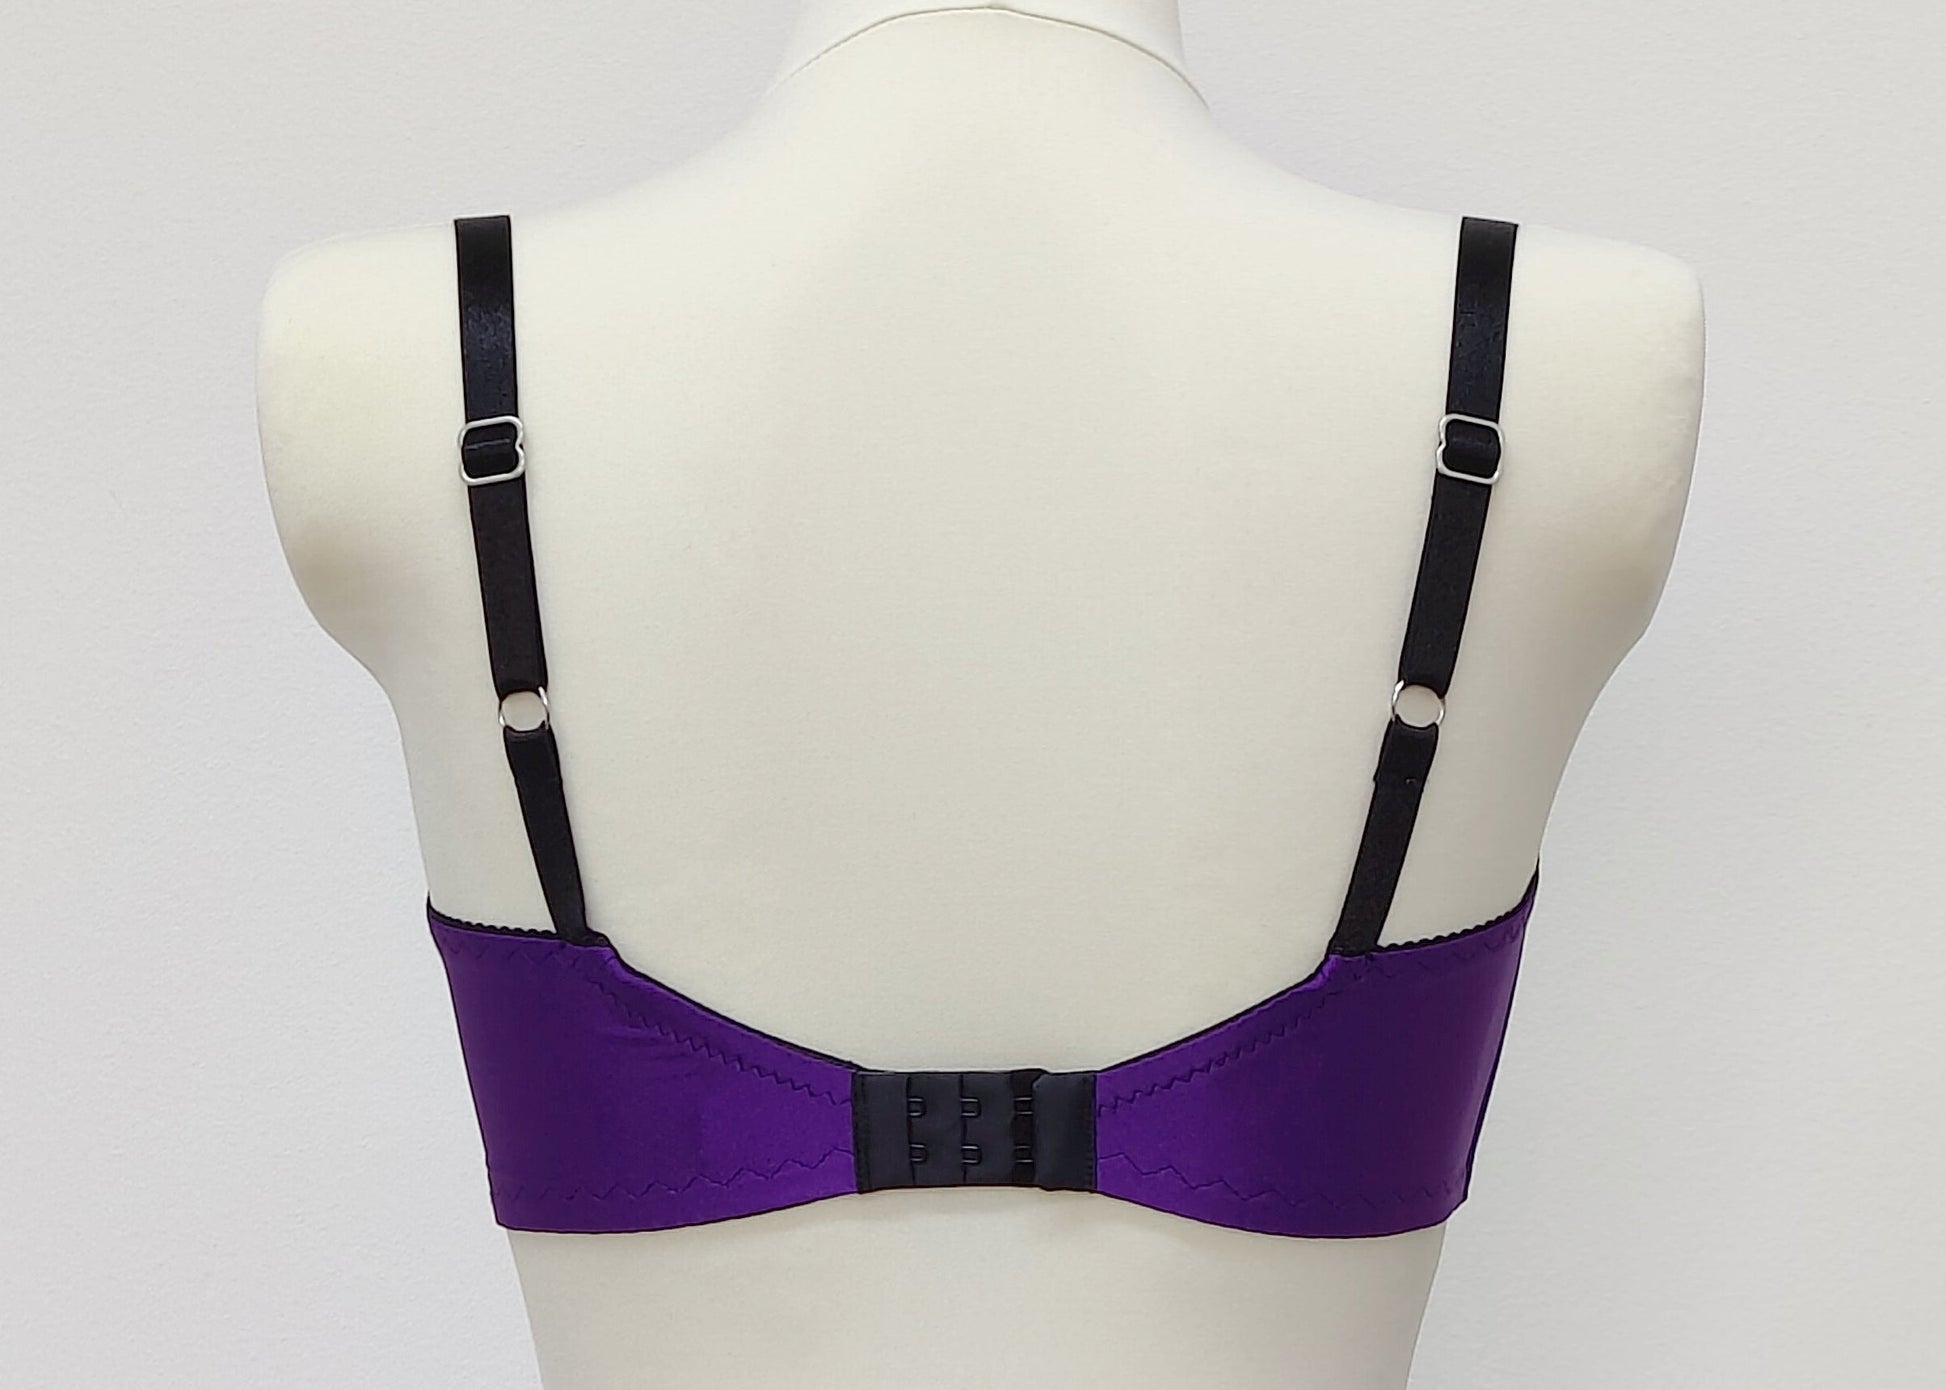 Purple LUCY Quarter cup bra with black lace and straps, size US 34C or EU 70C, back view